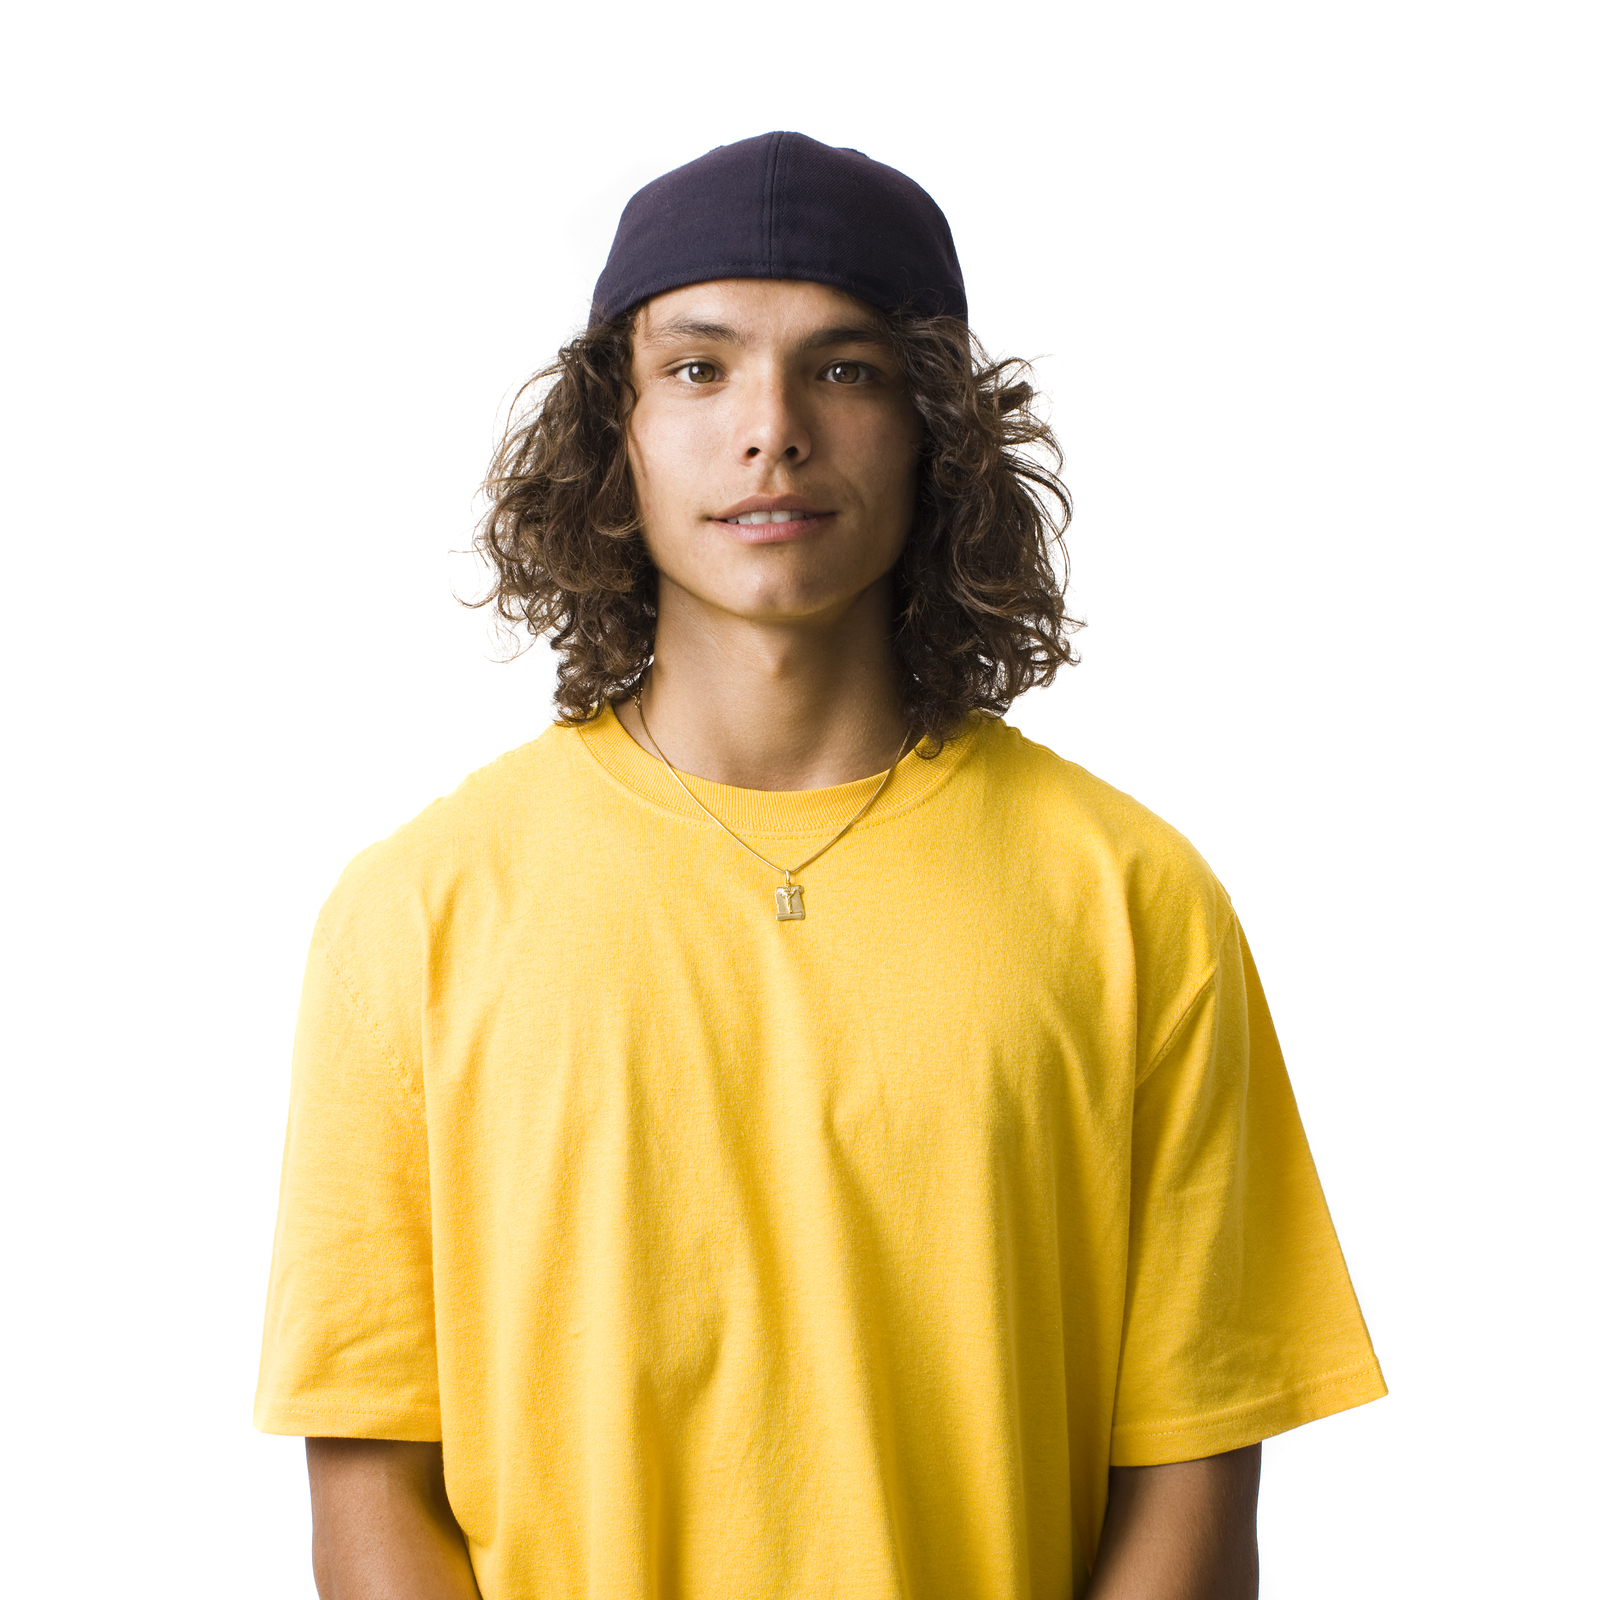 Teen in hat standing with confidence